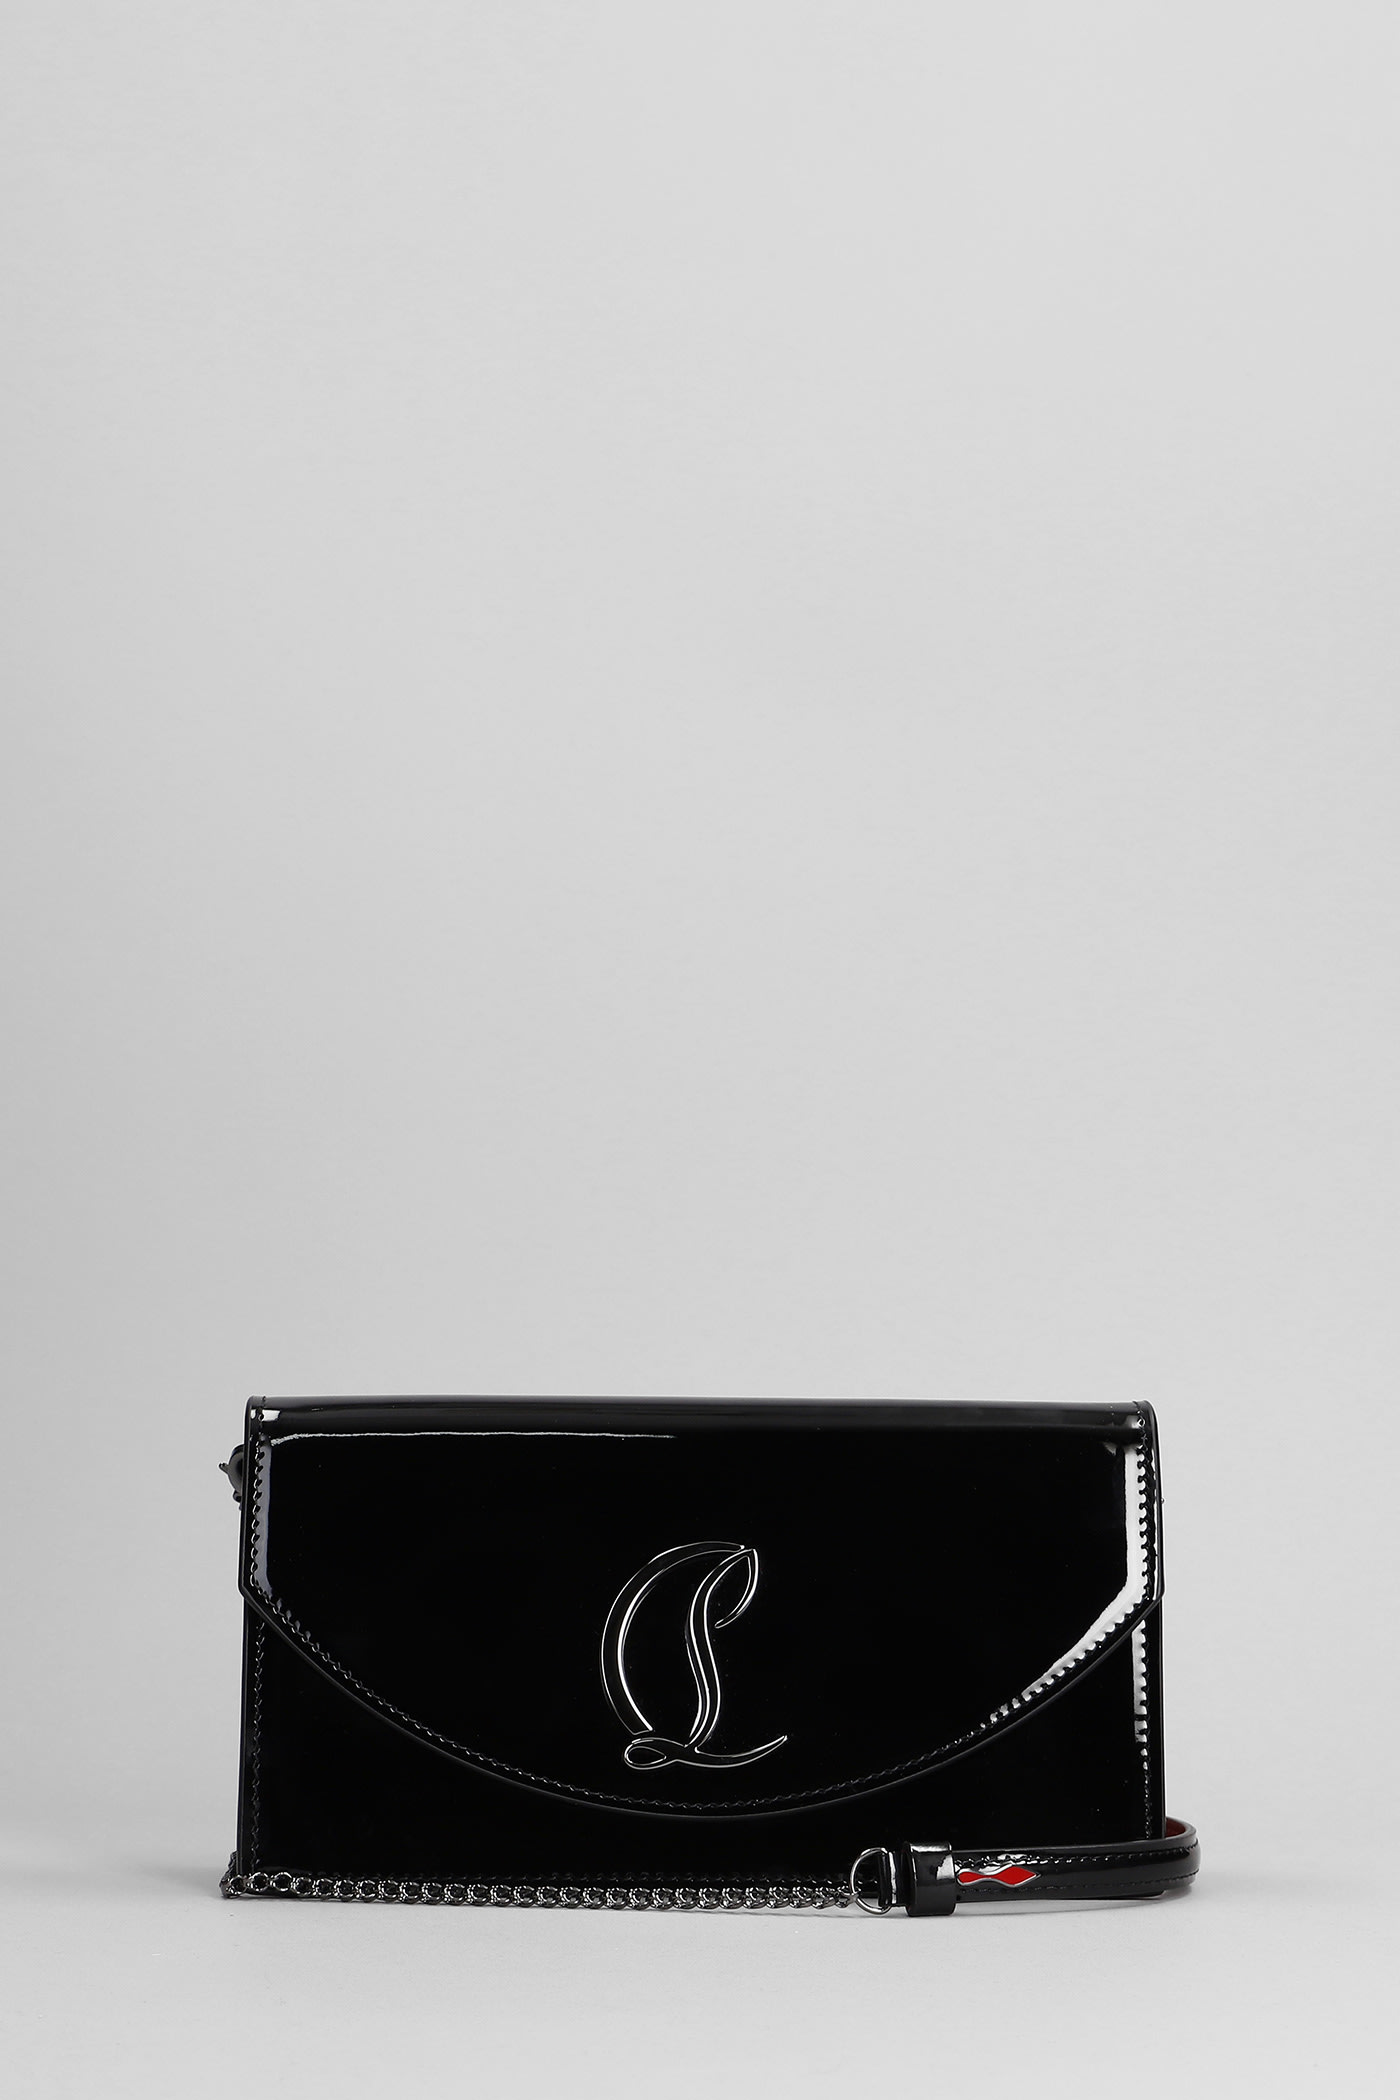 Christian Louboutin Loubi54 Hand Bag In Black Patent Leather